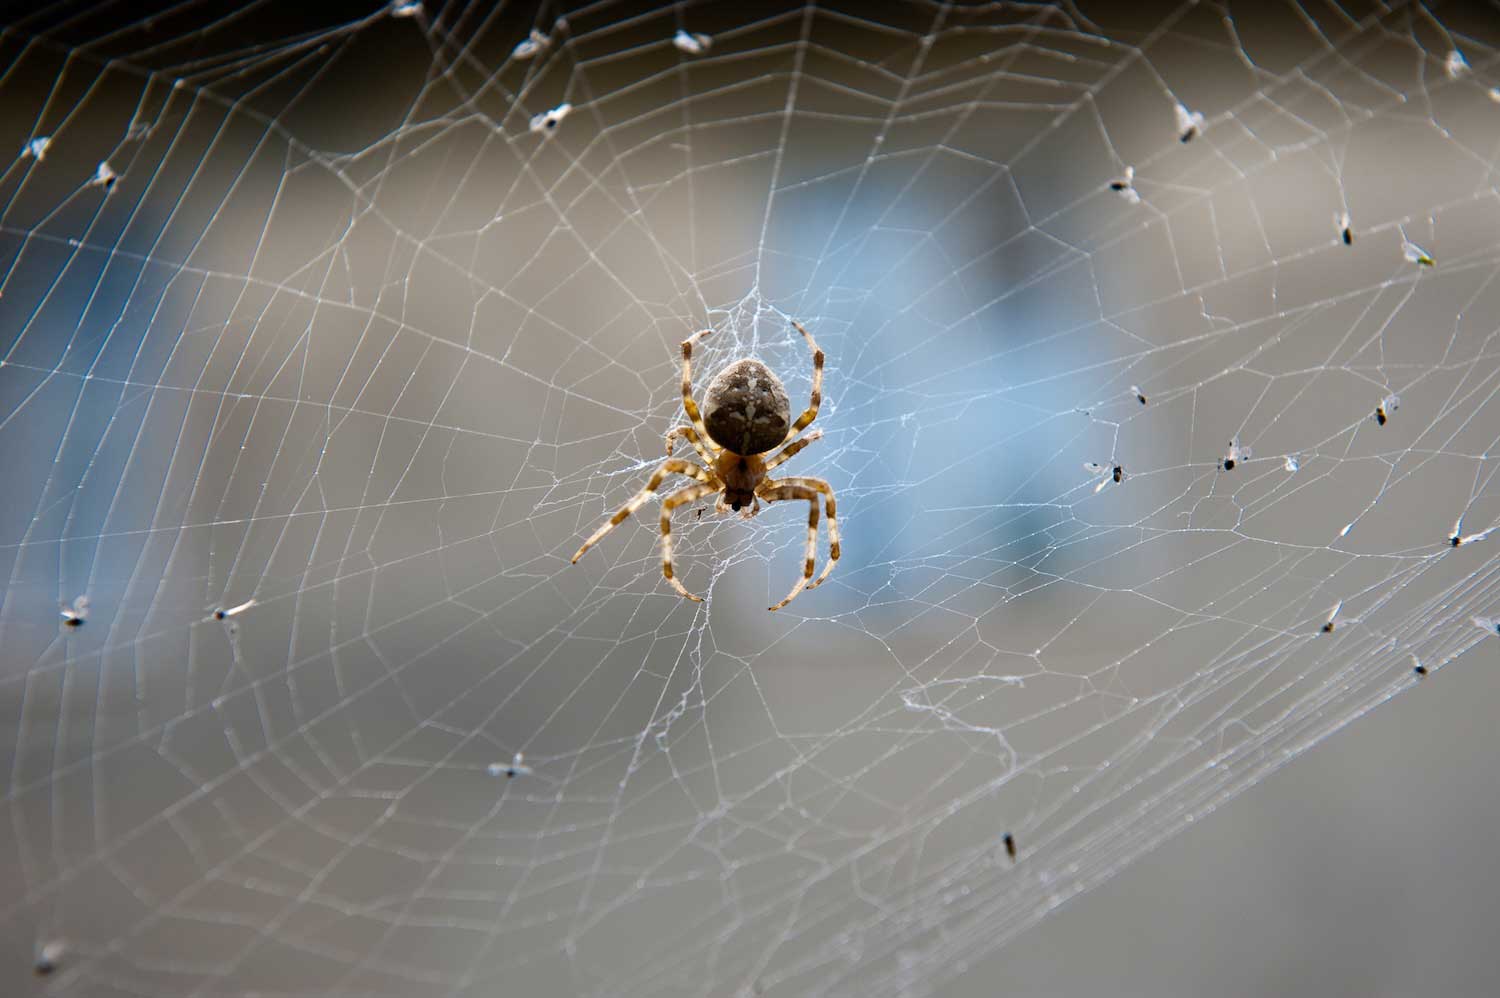 A spider in its web surrounded by small insects caught in the web.